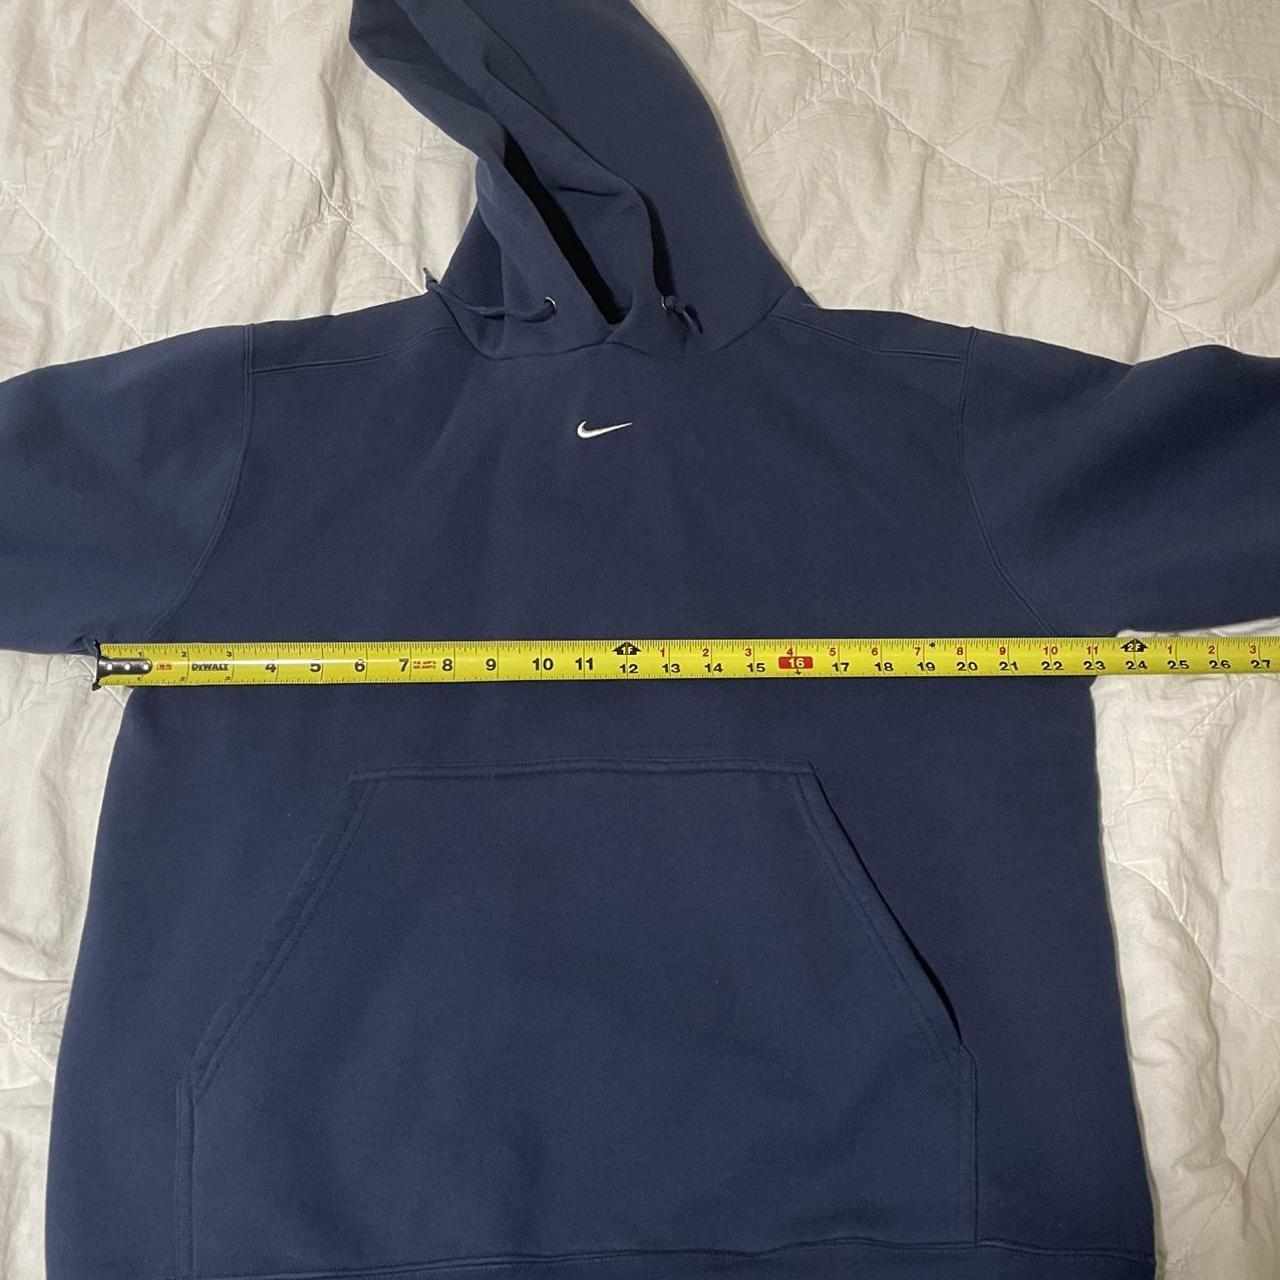 Nike center swoosh REP. Size small fits like a small - Depop